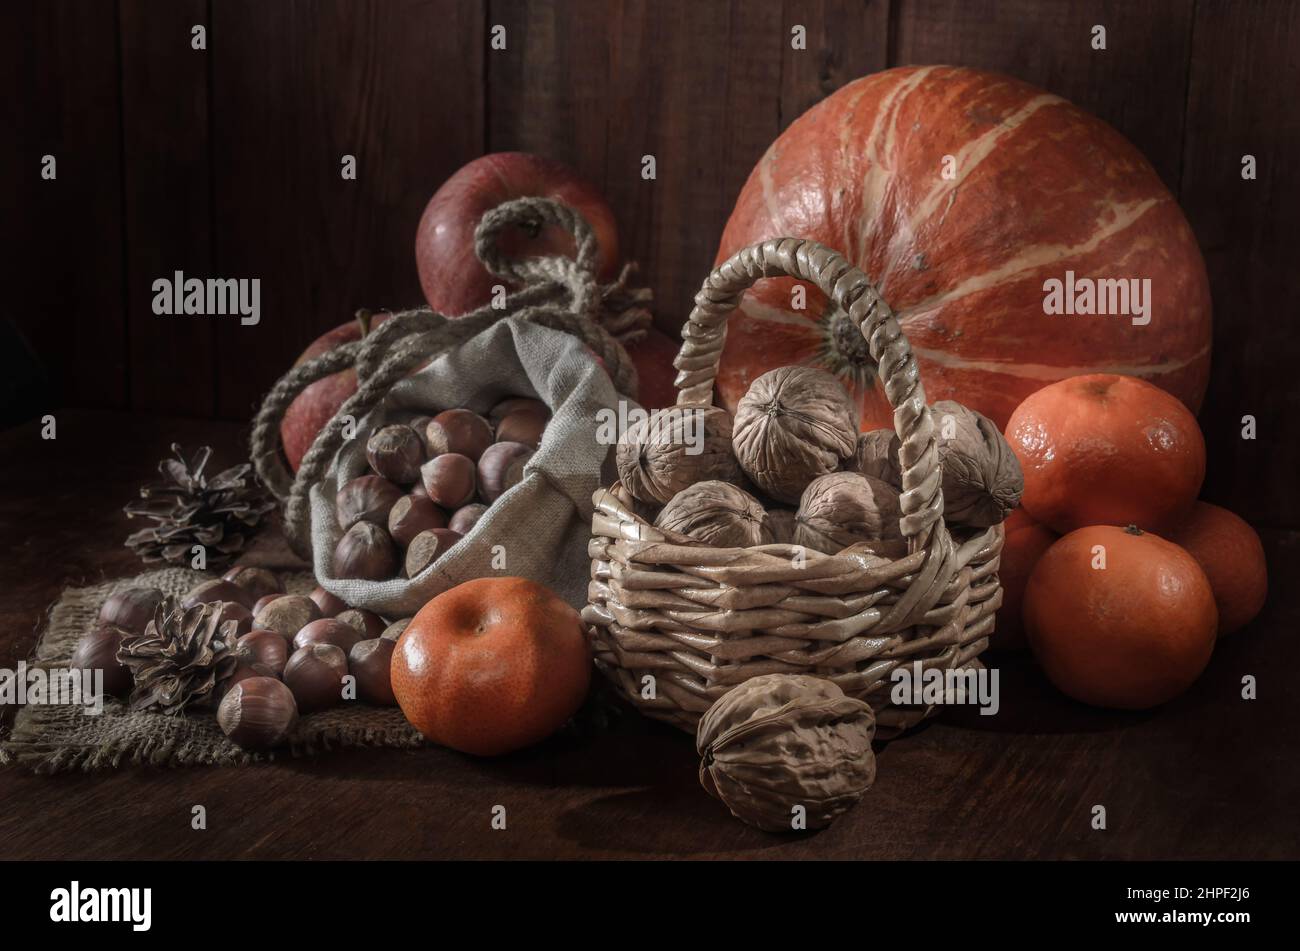 nuts and other fruits on a dark wooden background Stock Photo